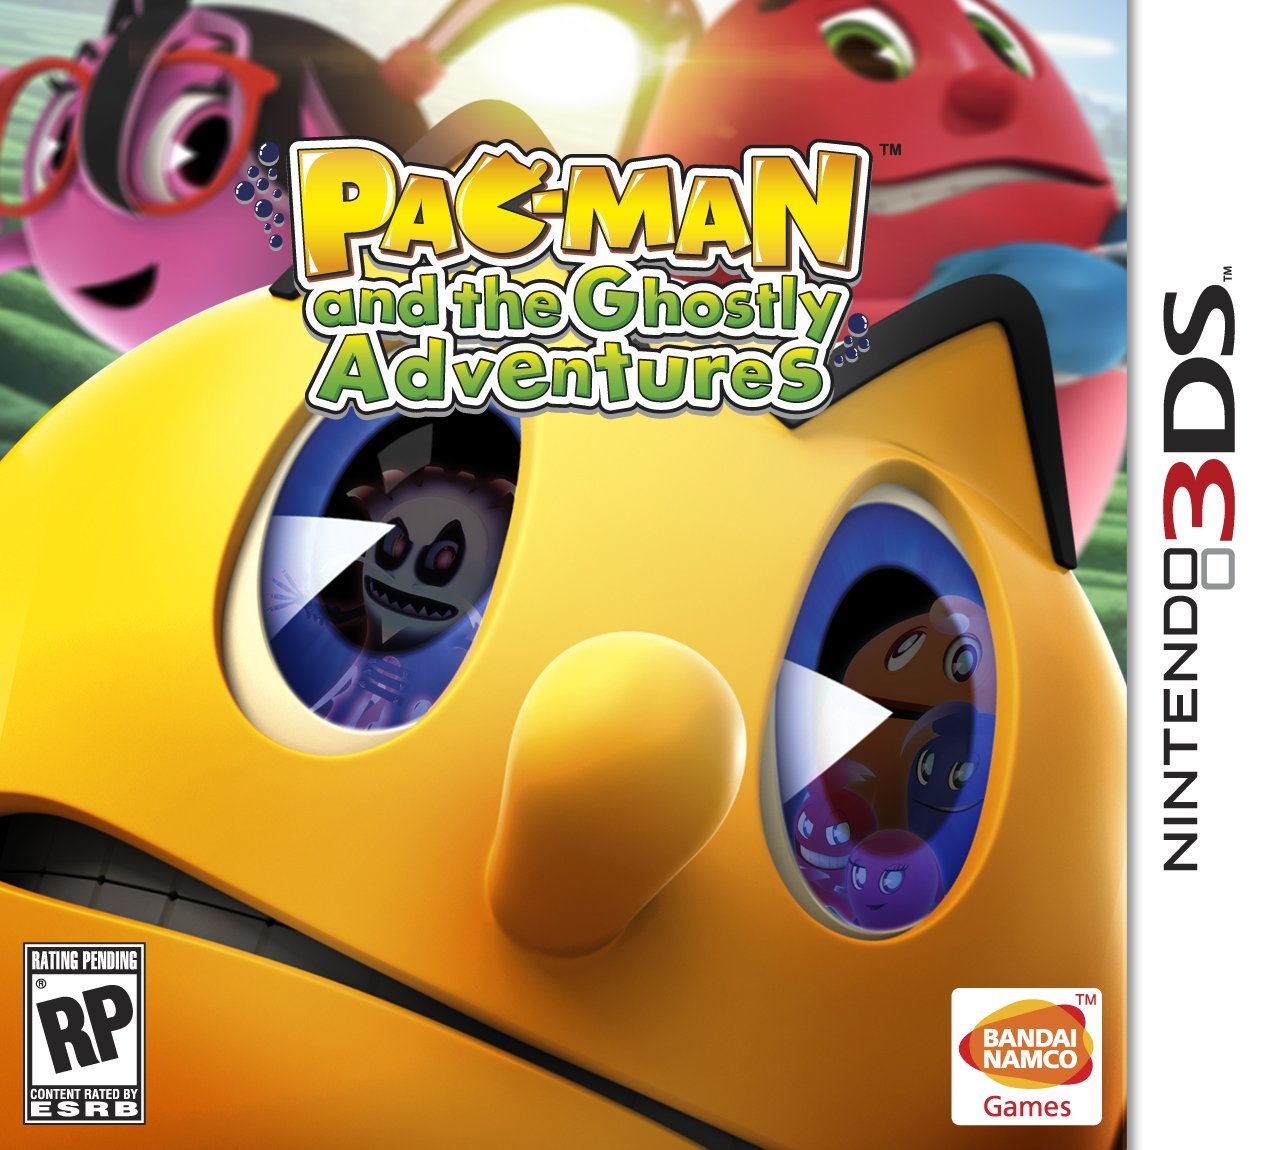 pac-man_ghostly_adventures_boxart_3ds.jpg